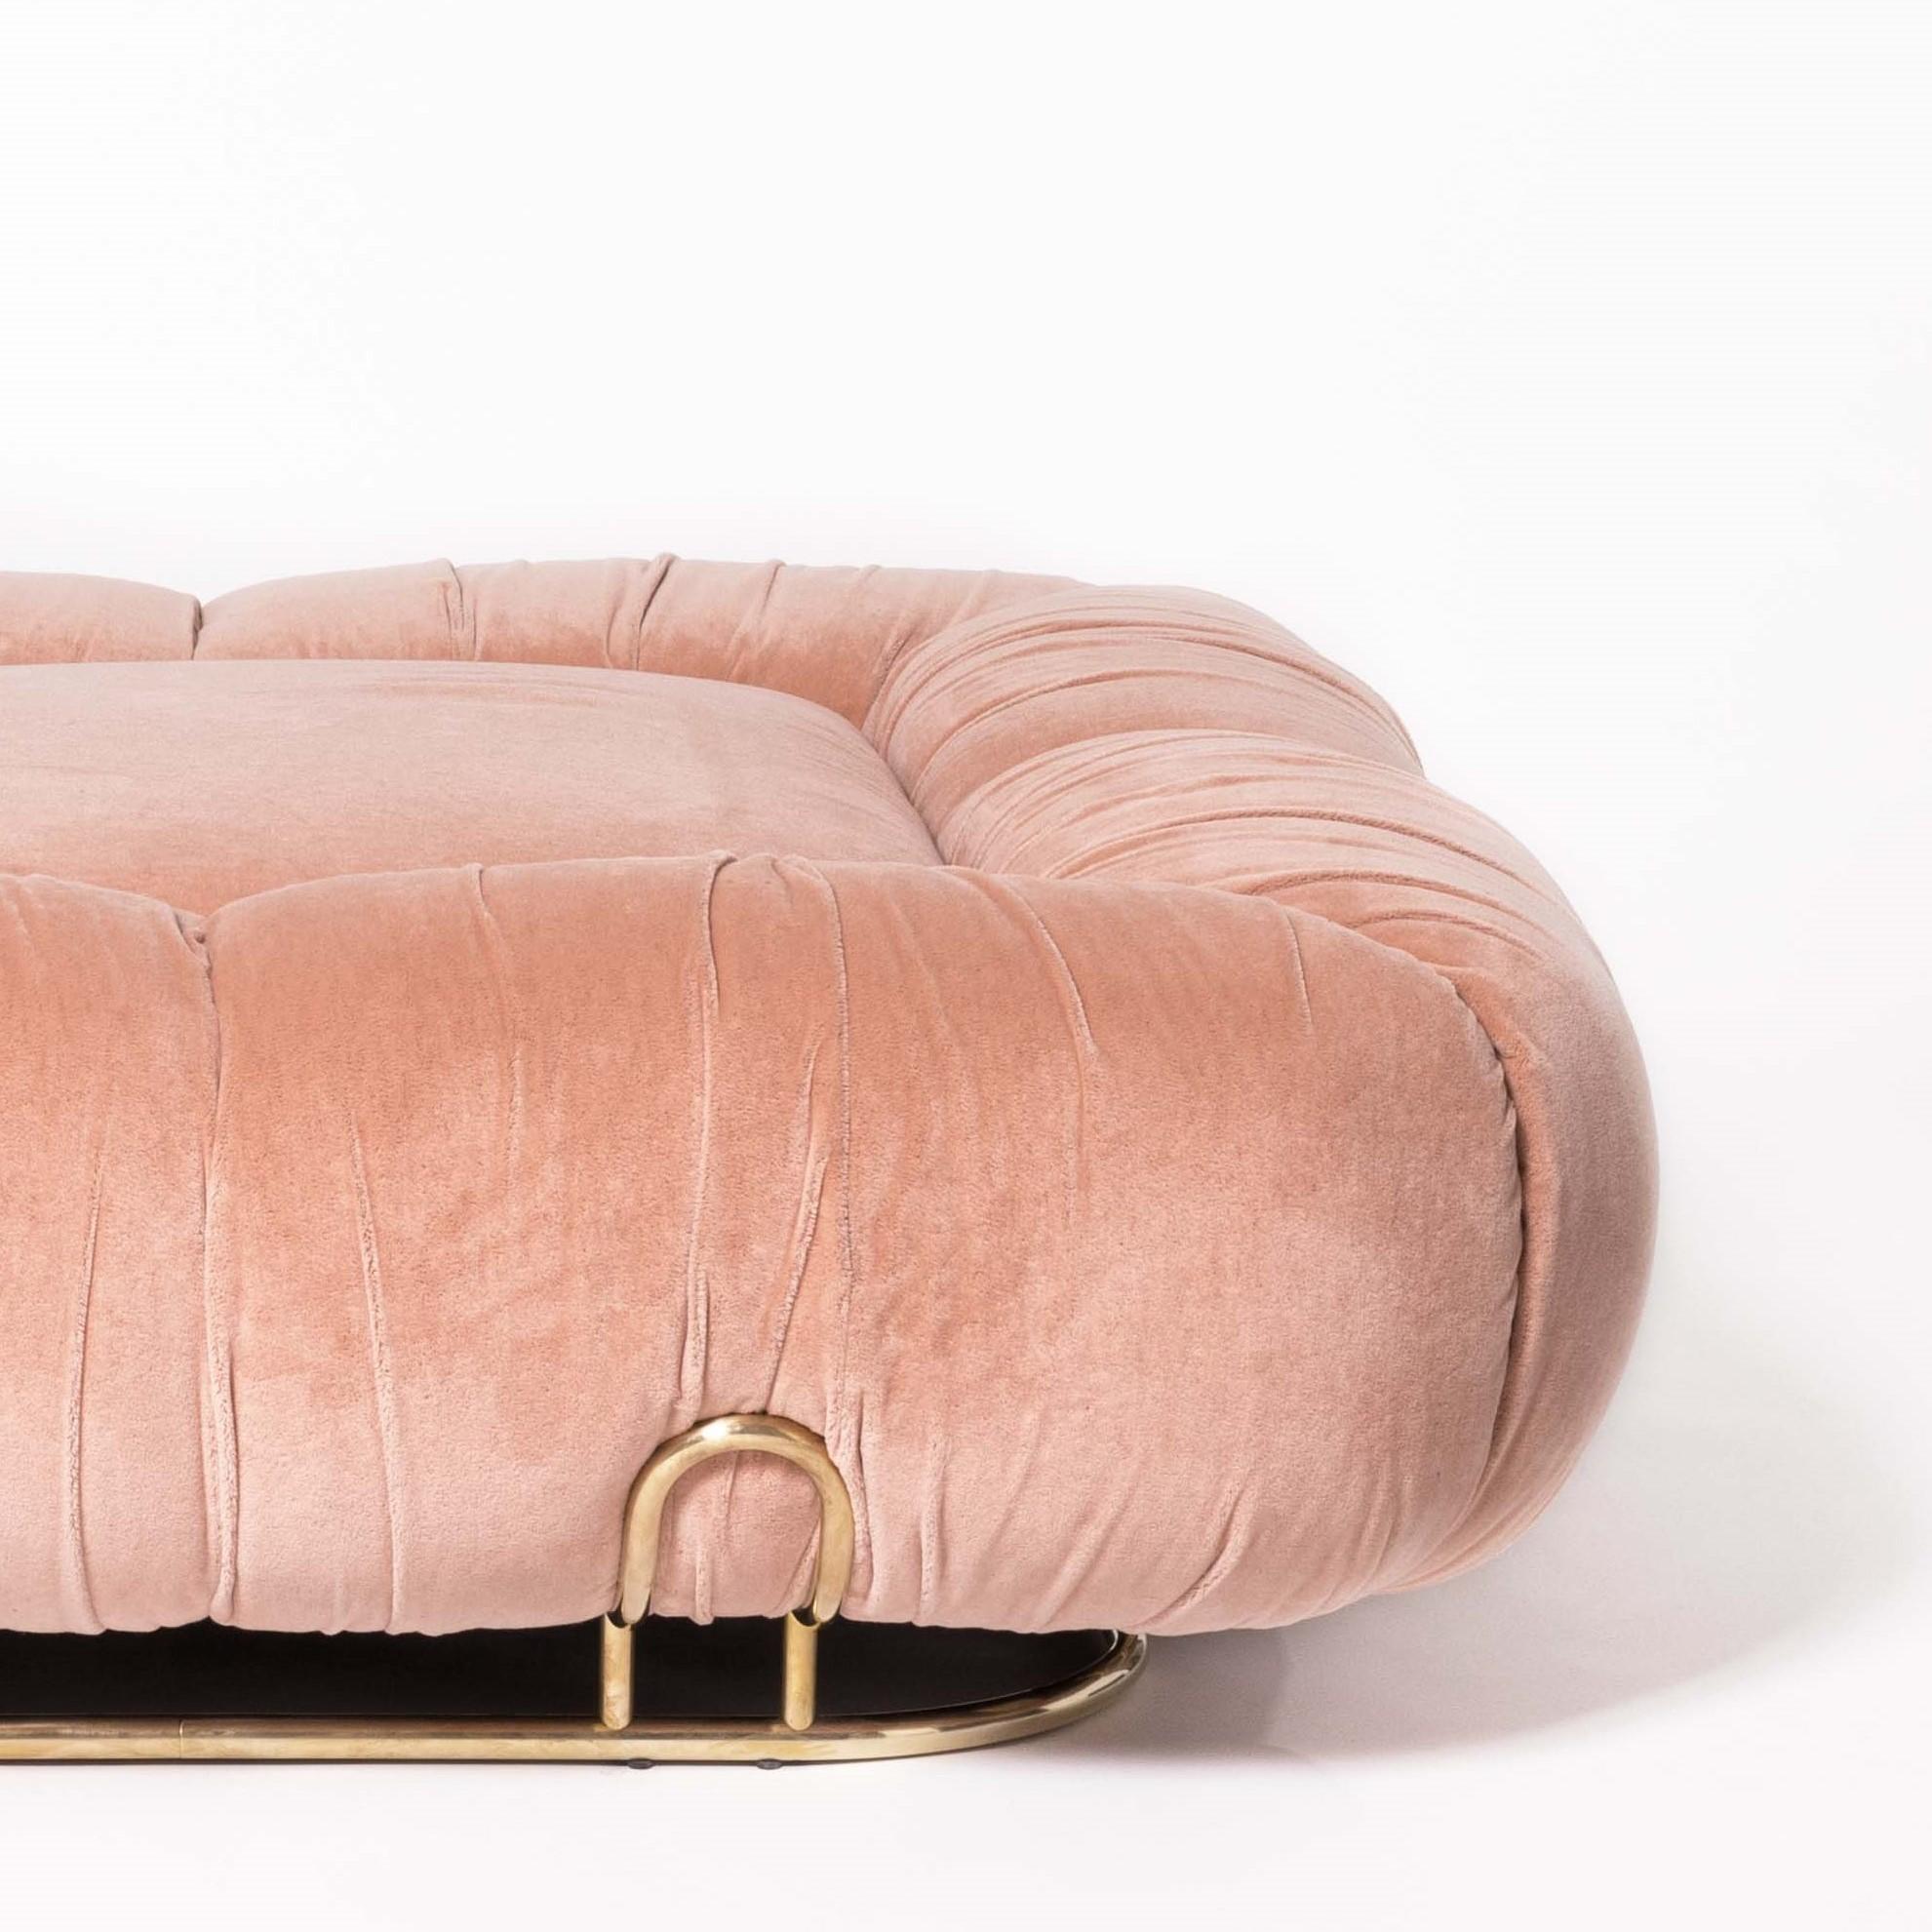 Unique pouf marshmallow by Draga & Aurel.
Dimensions: W 120 D 120 H 38.
Materials: wool velvet.

Deliciously soft and fluffy. This is the design of marshmallow pouf, whose soft shapes live up to its name. It stands out for its polished brass